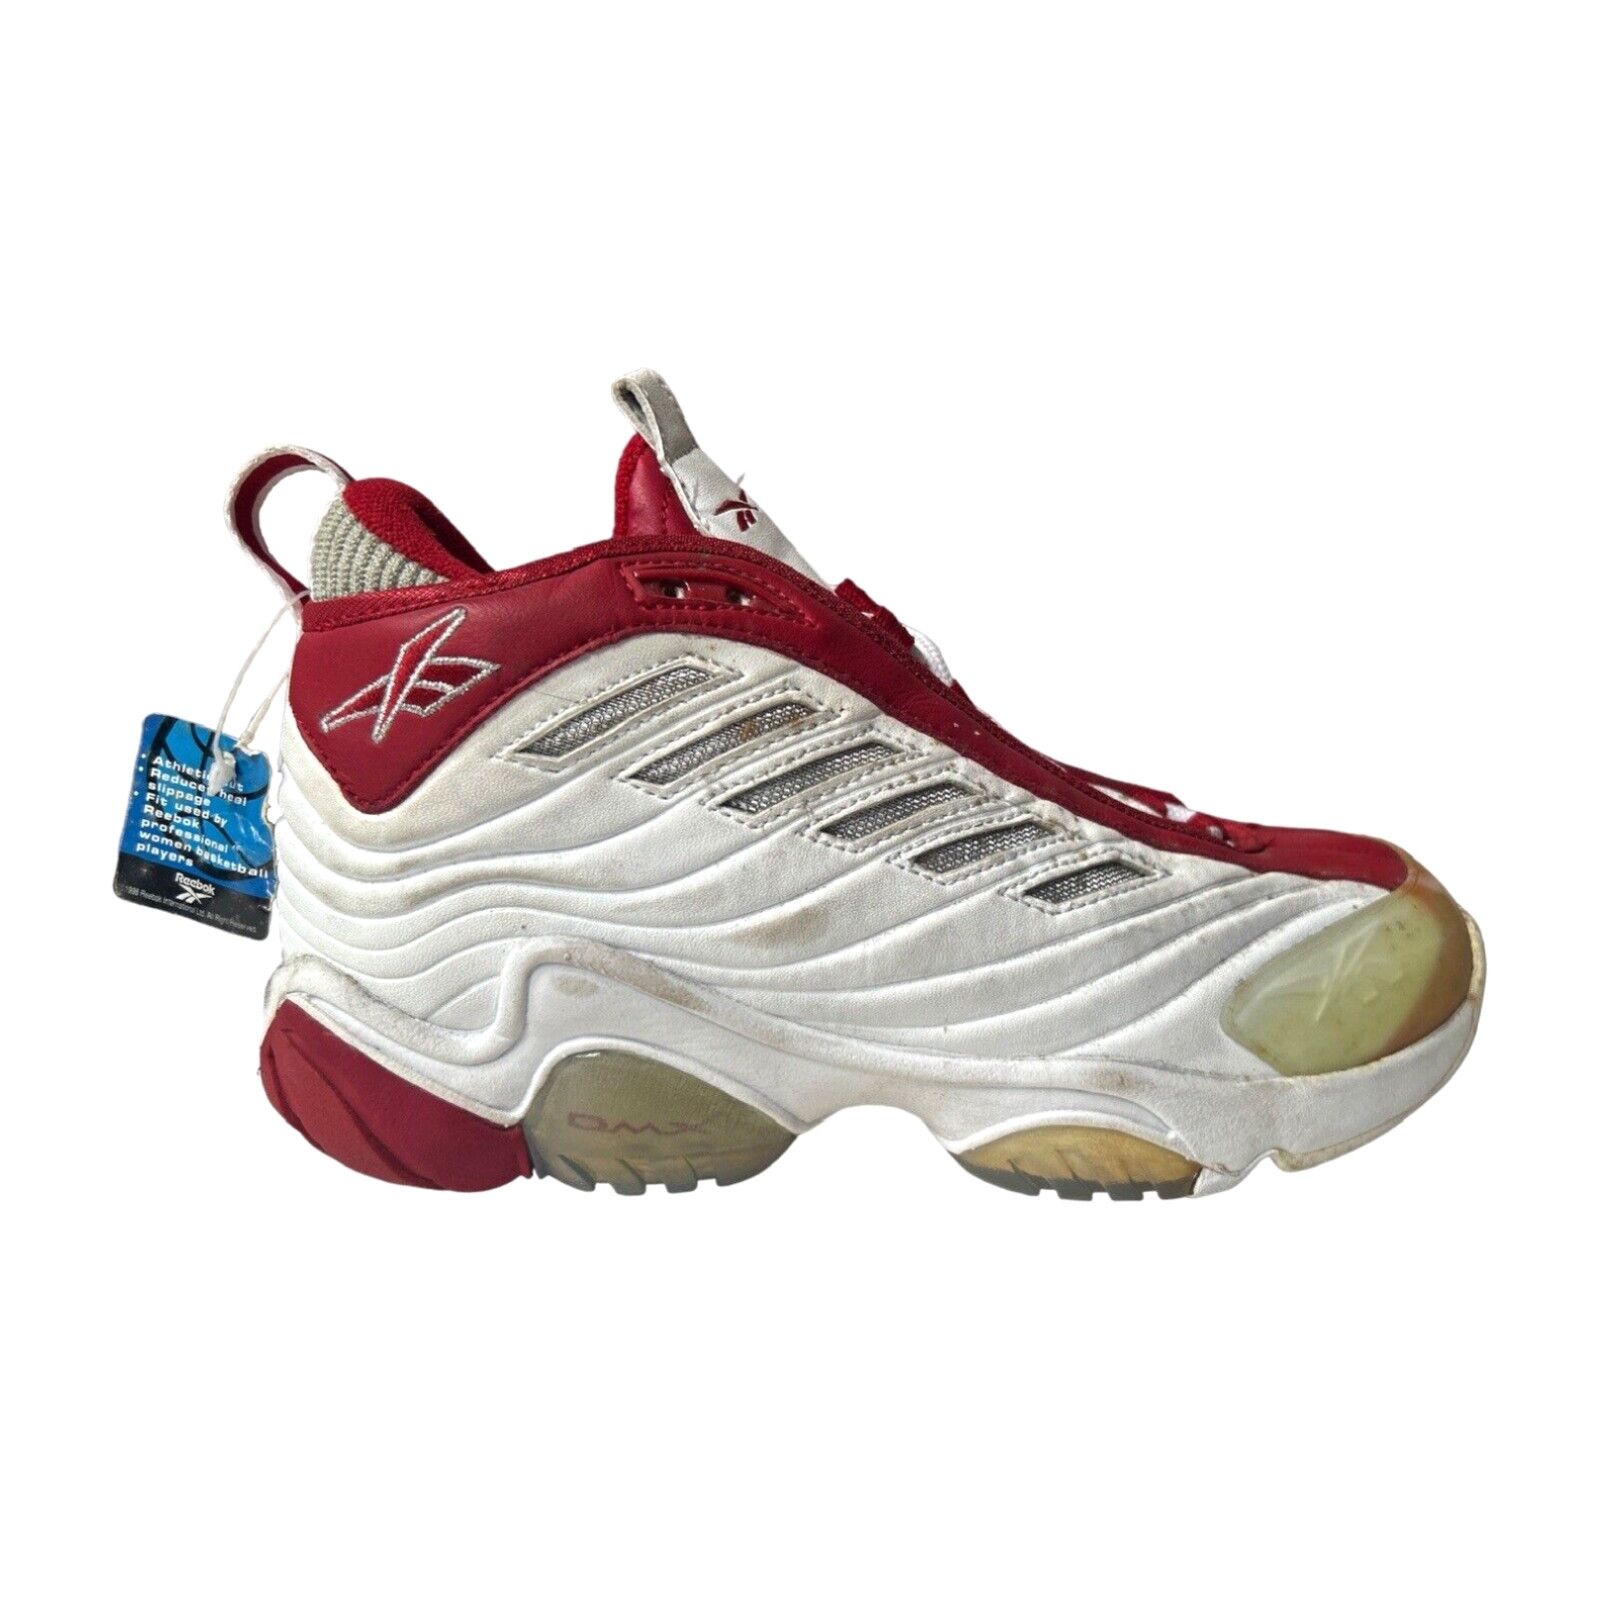 Reebok vintage reebok DMX basketball shoes womens size 8 deadstock NWT 90s 1998 Size ONE SIZE - 1 Preview